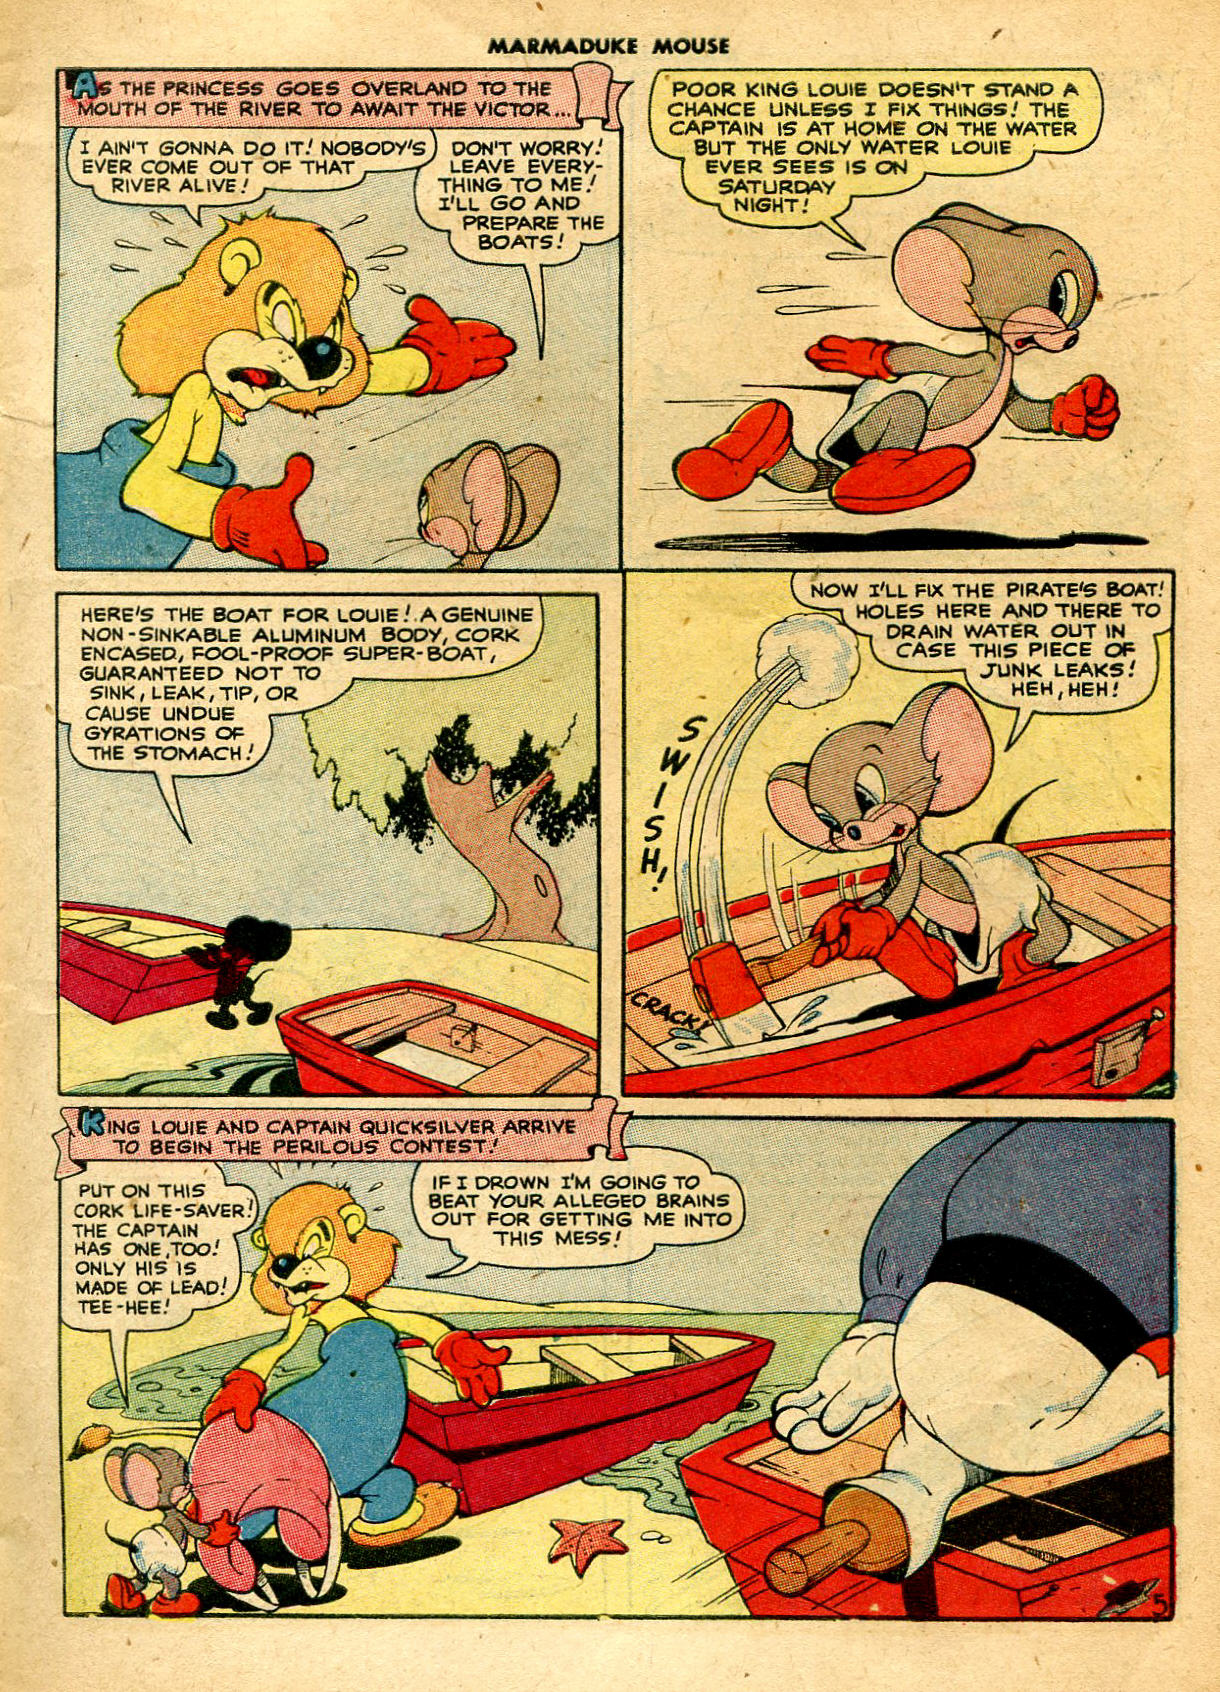 Read online Marmaduke Mouse comic -  Issue #6 - 7